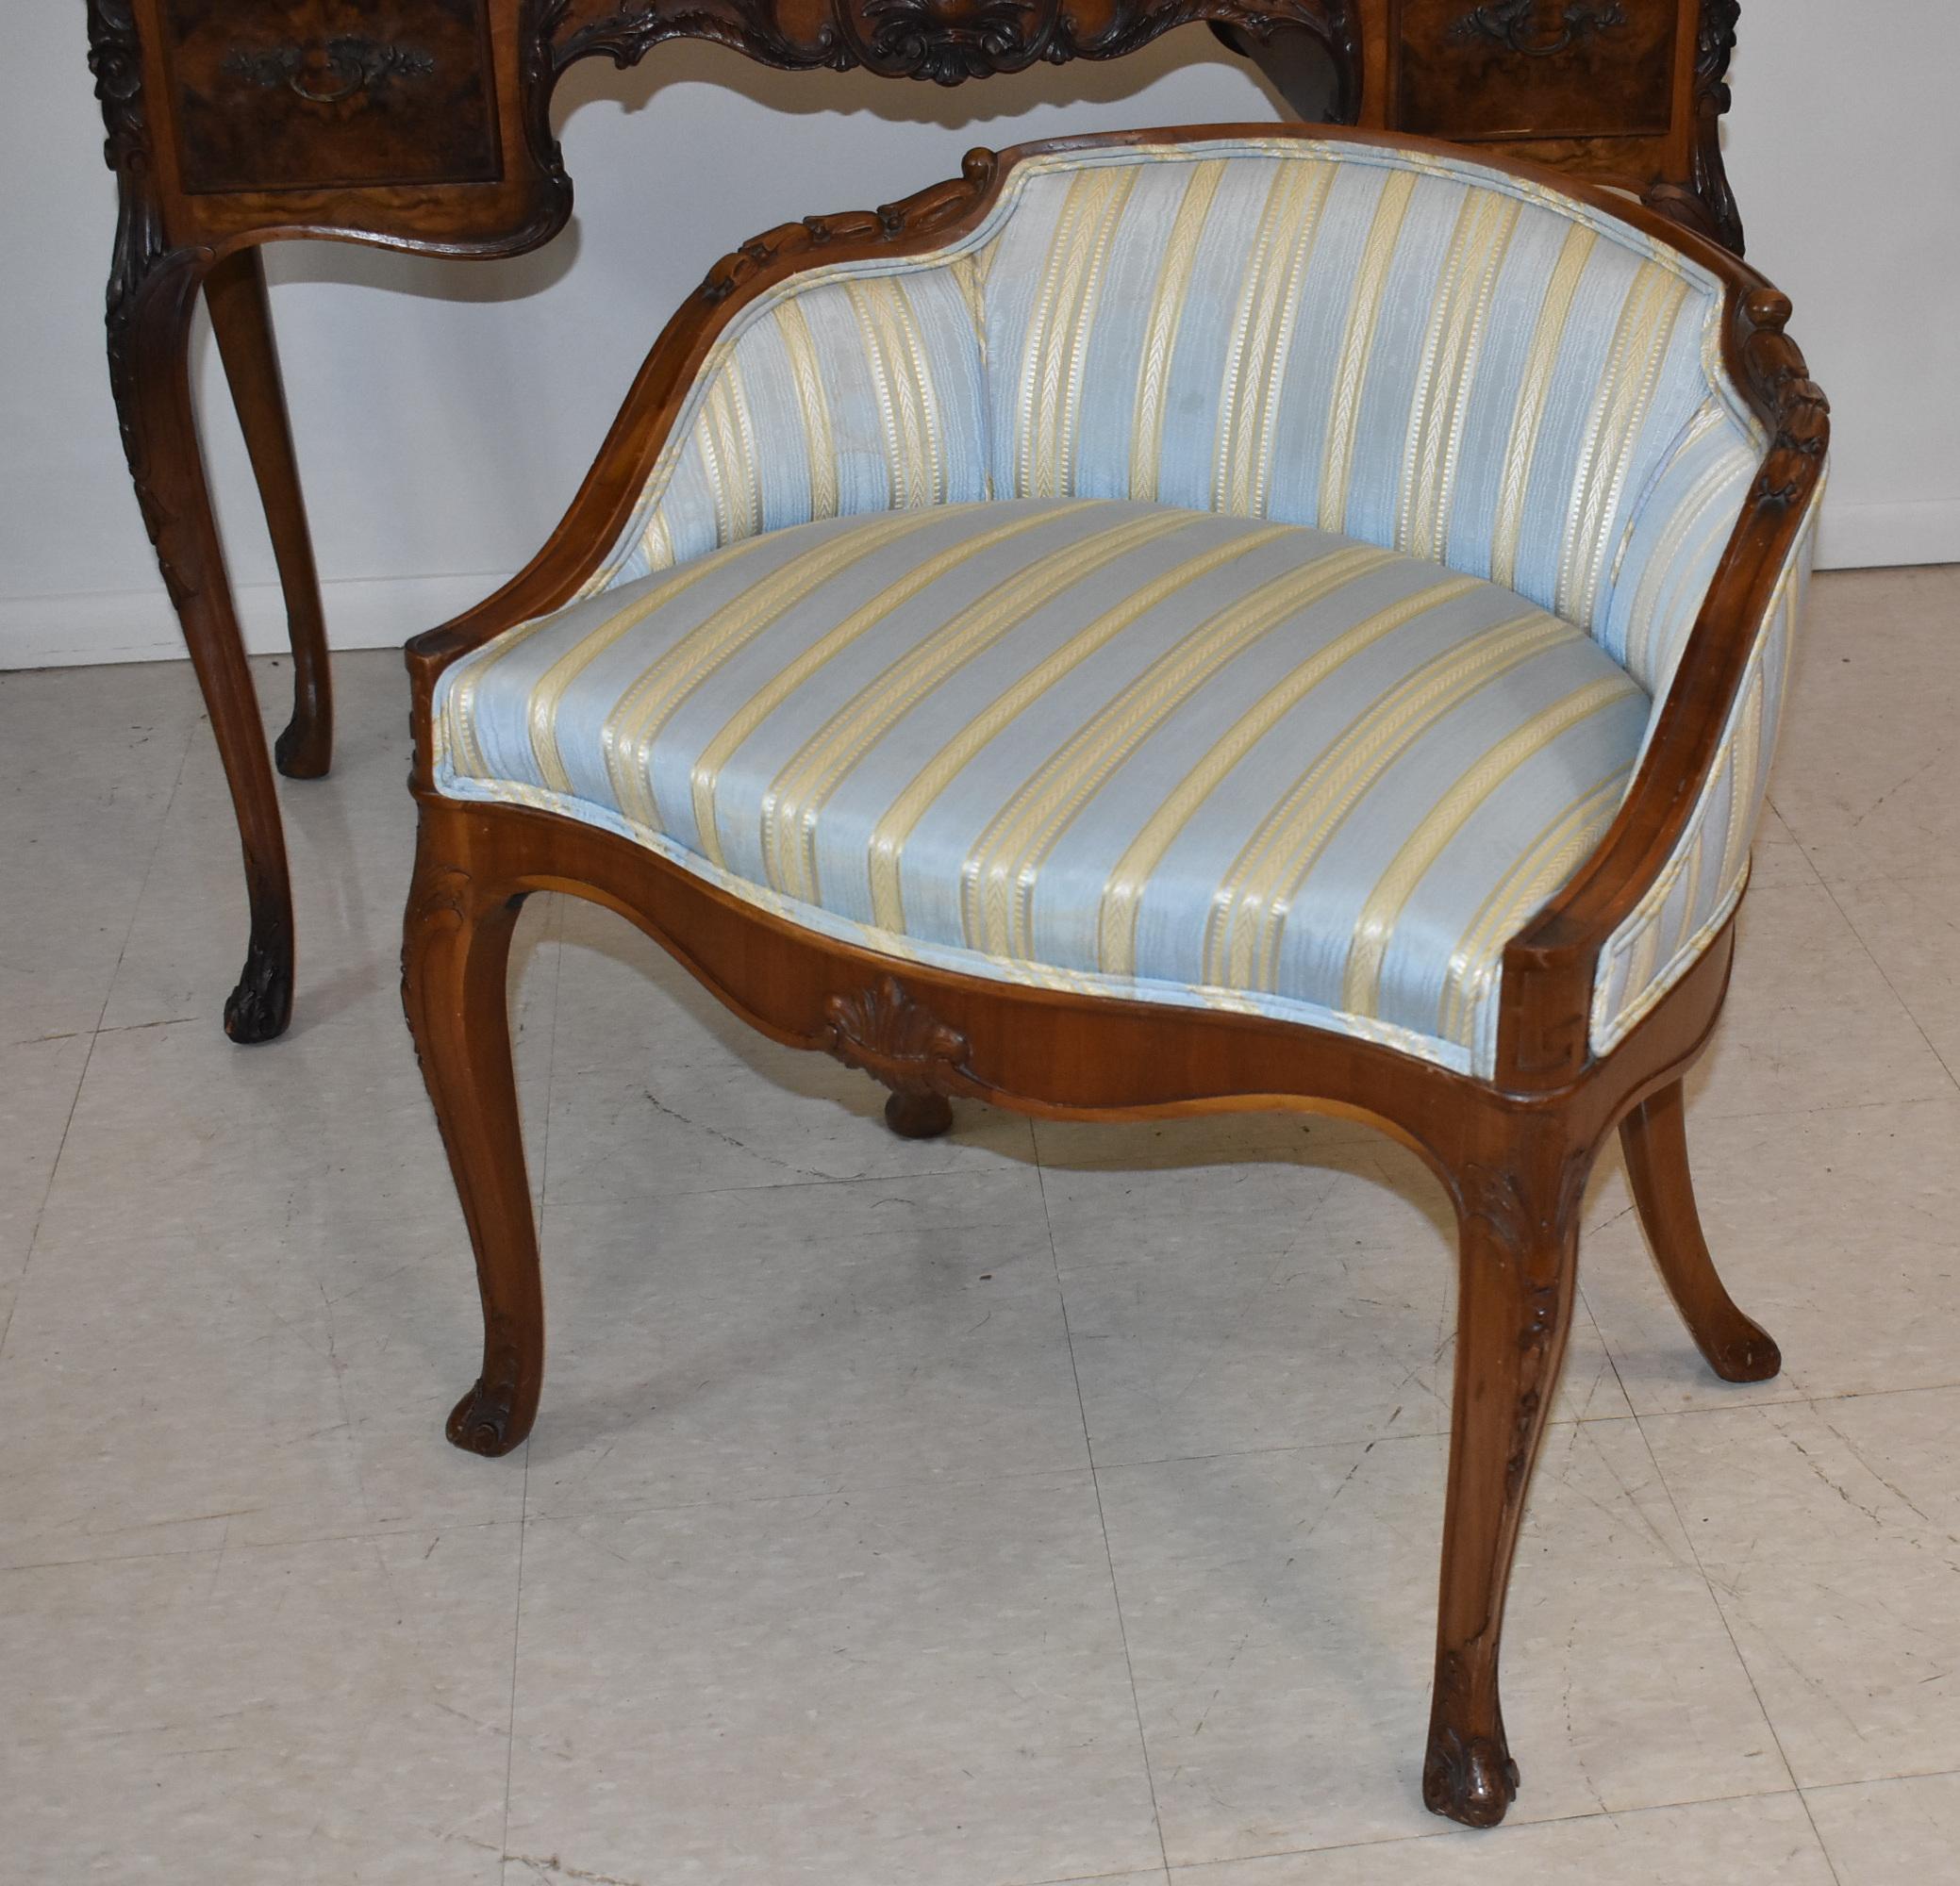 Early 20th Century Louis XV French Style Walnut Dressing Table / Vanity & Chair by Irwin Furniture